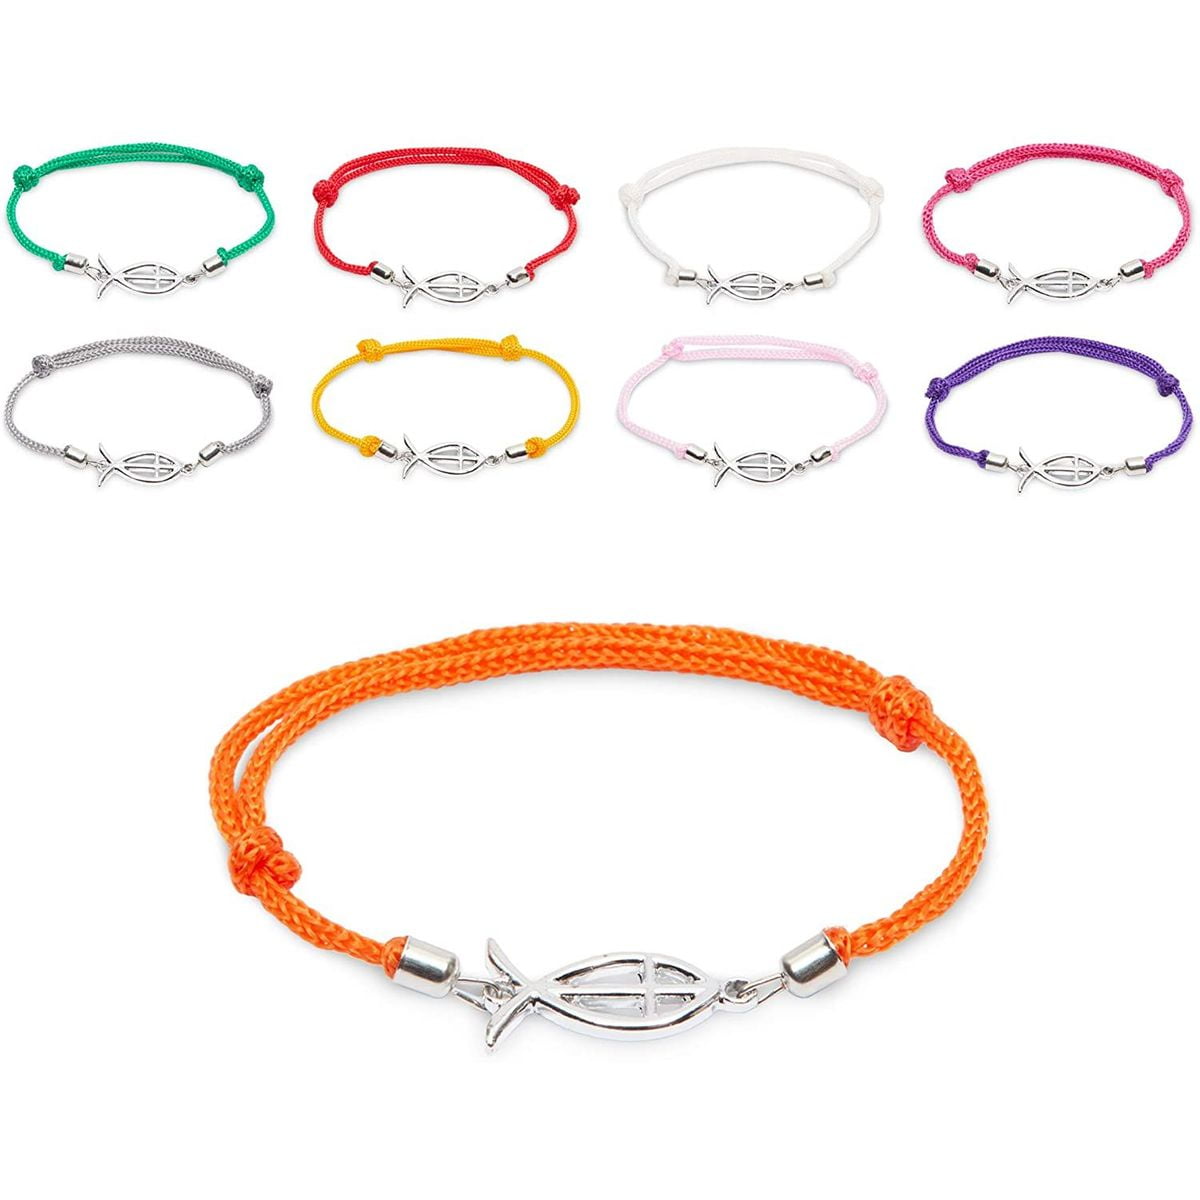 12 Pcs Adjustable Religious Bracelets for Women and Men Jewelry Accessories, Christian Fish, 12 Colors